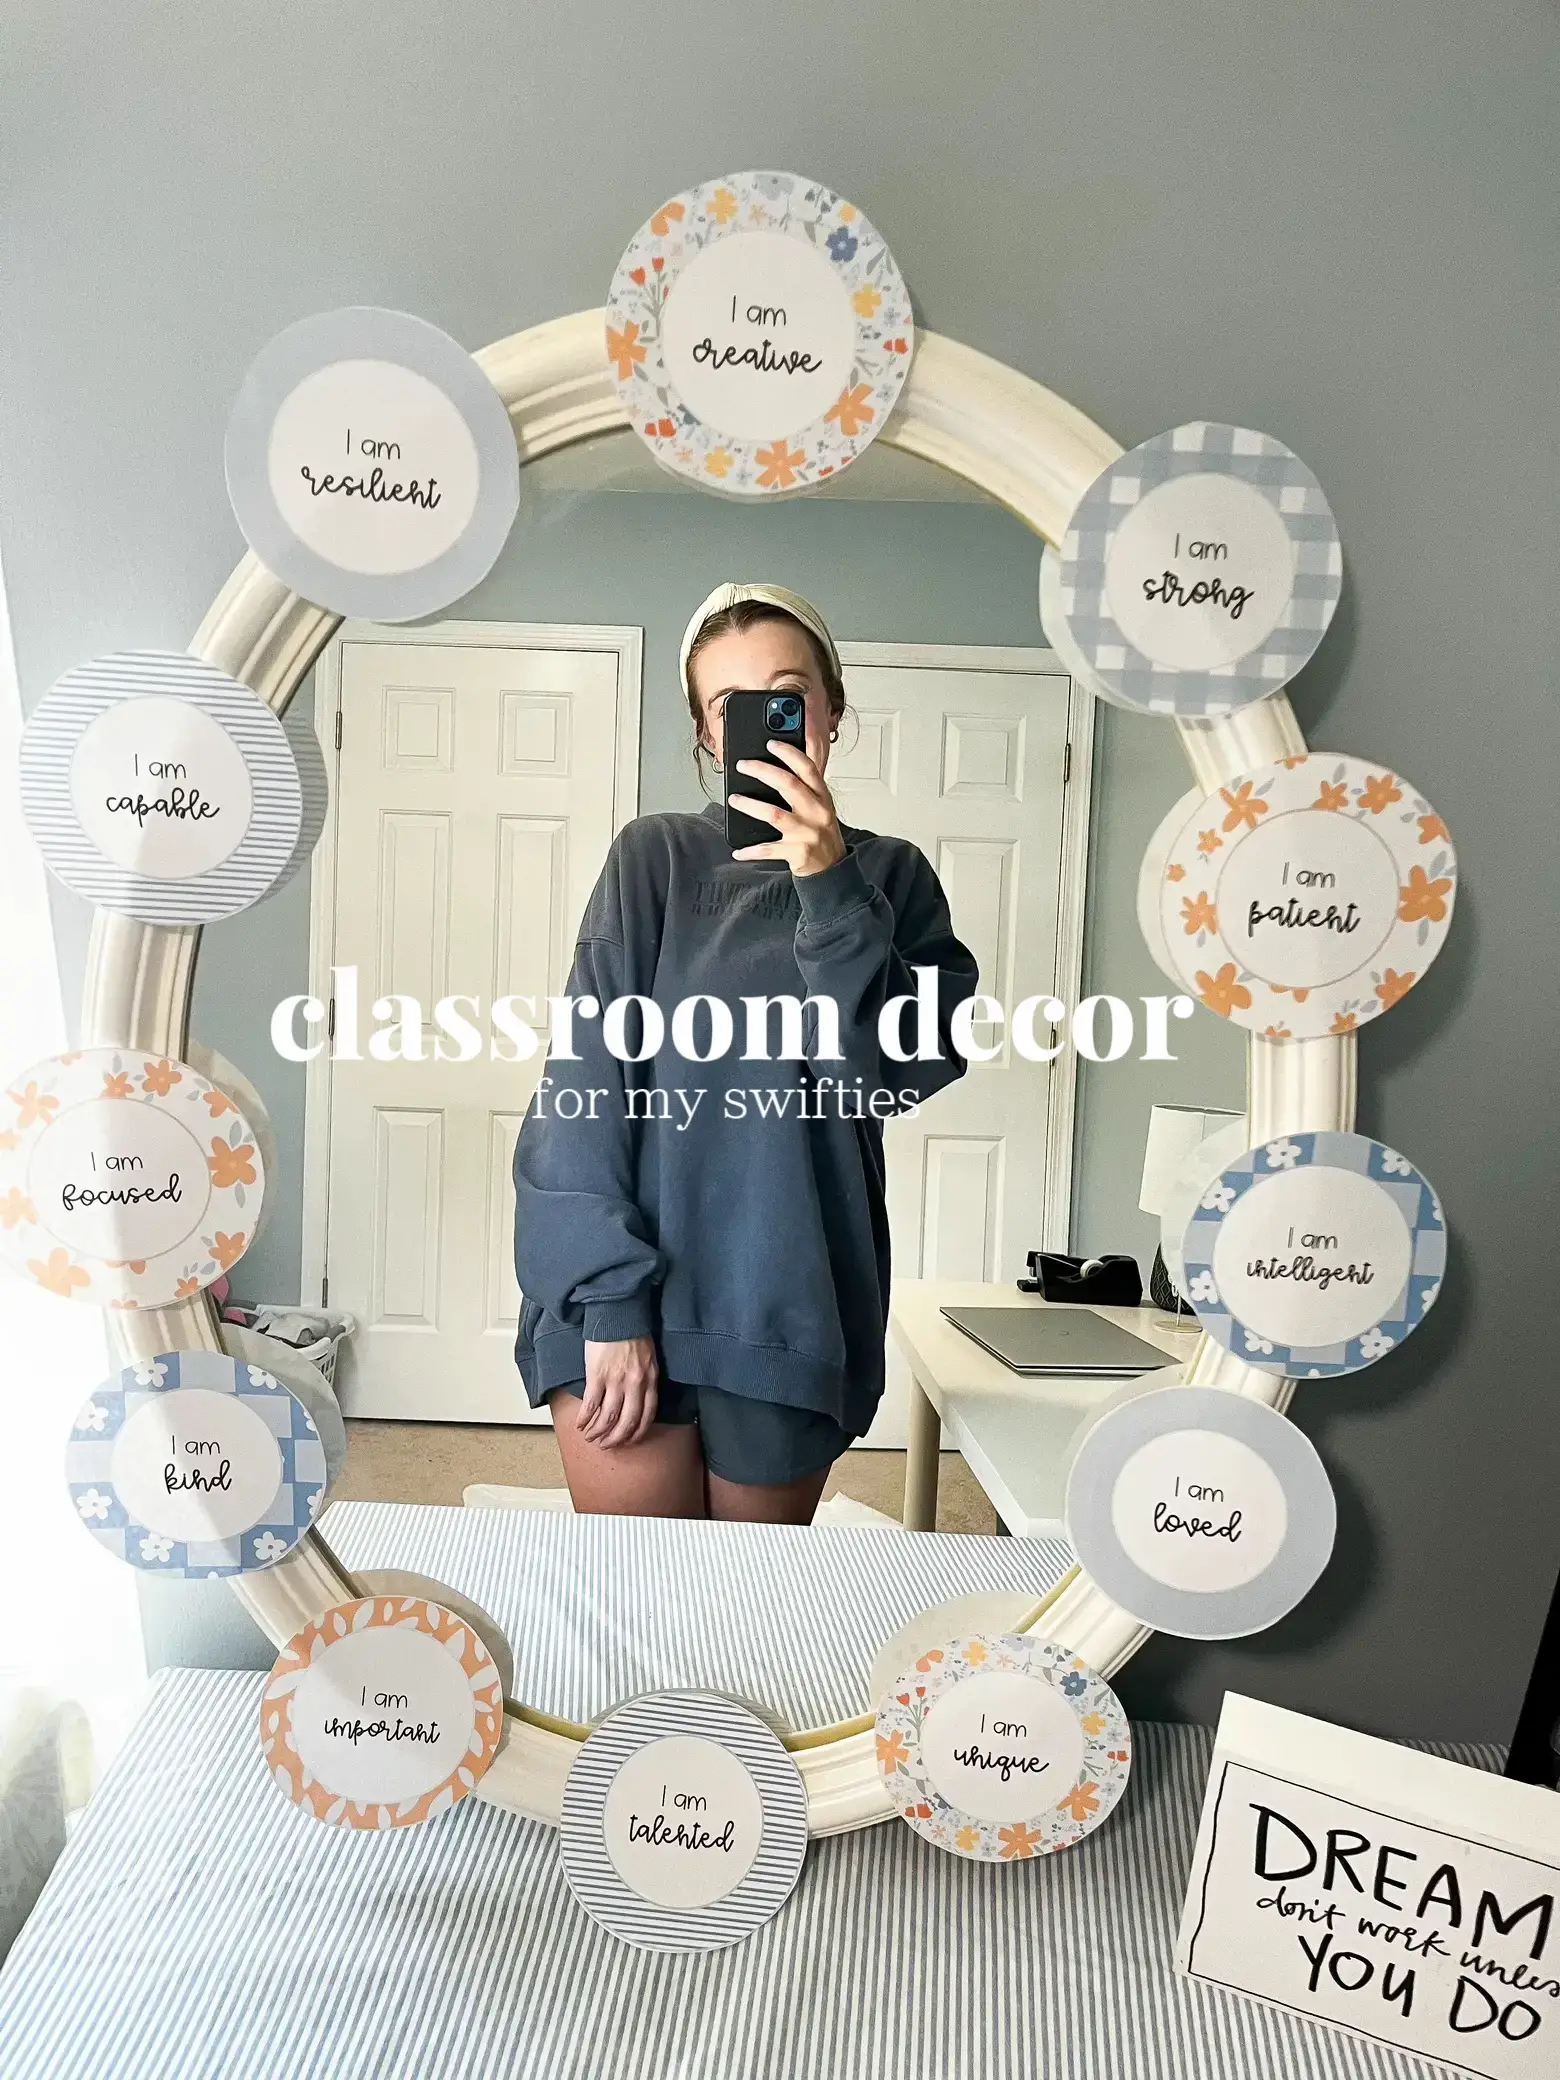 Swiftie inspired classroom decor bundle is here! Grab it NOW for a ME